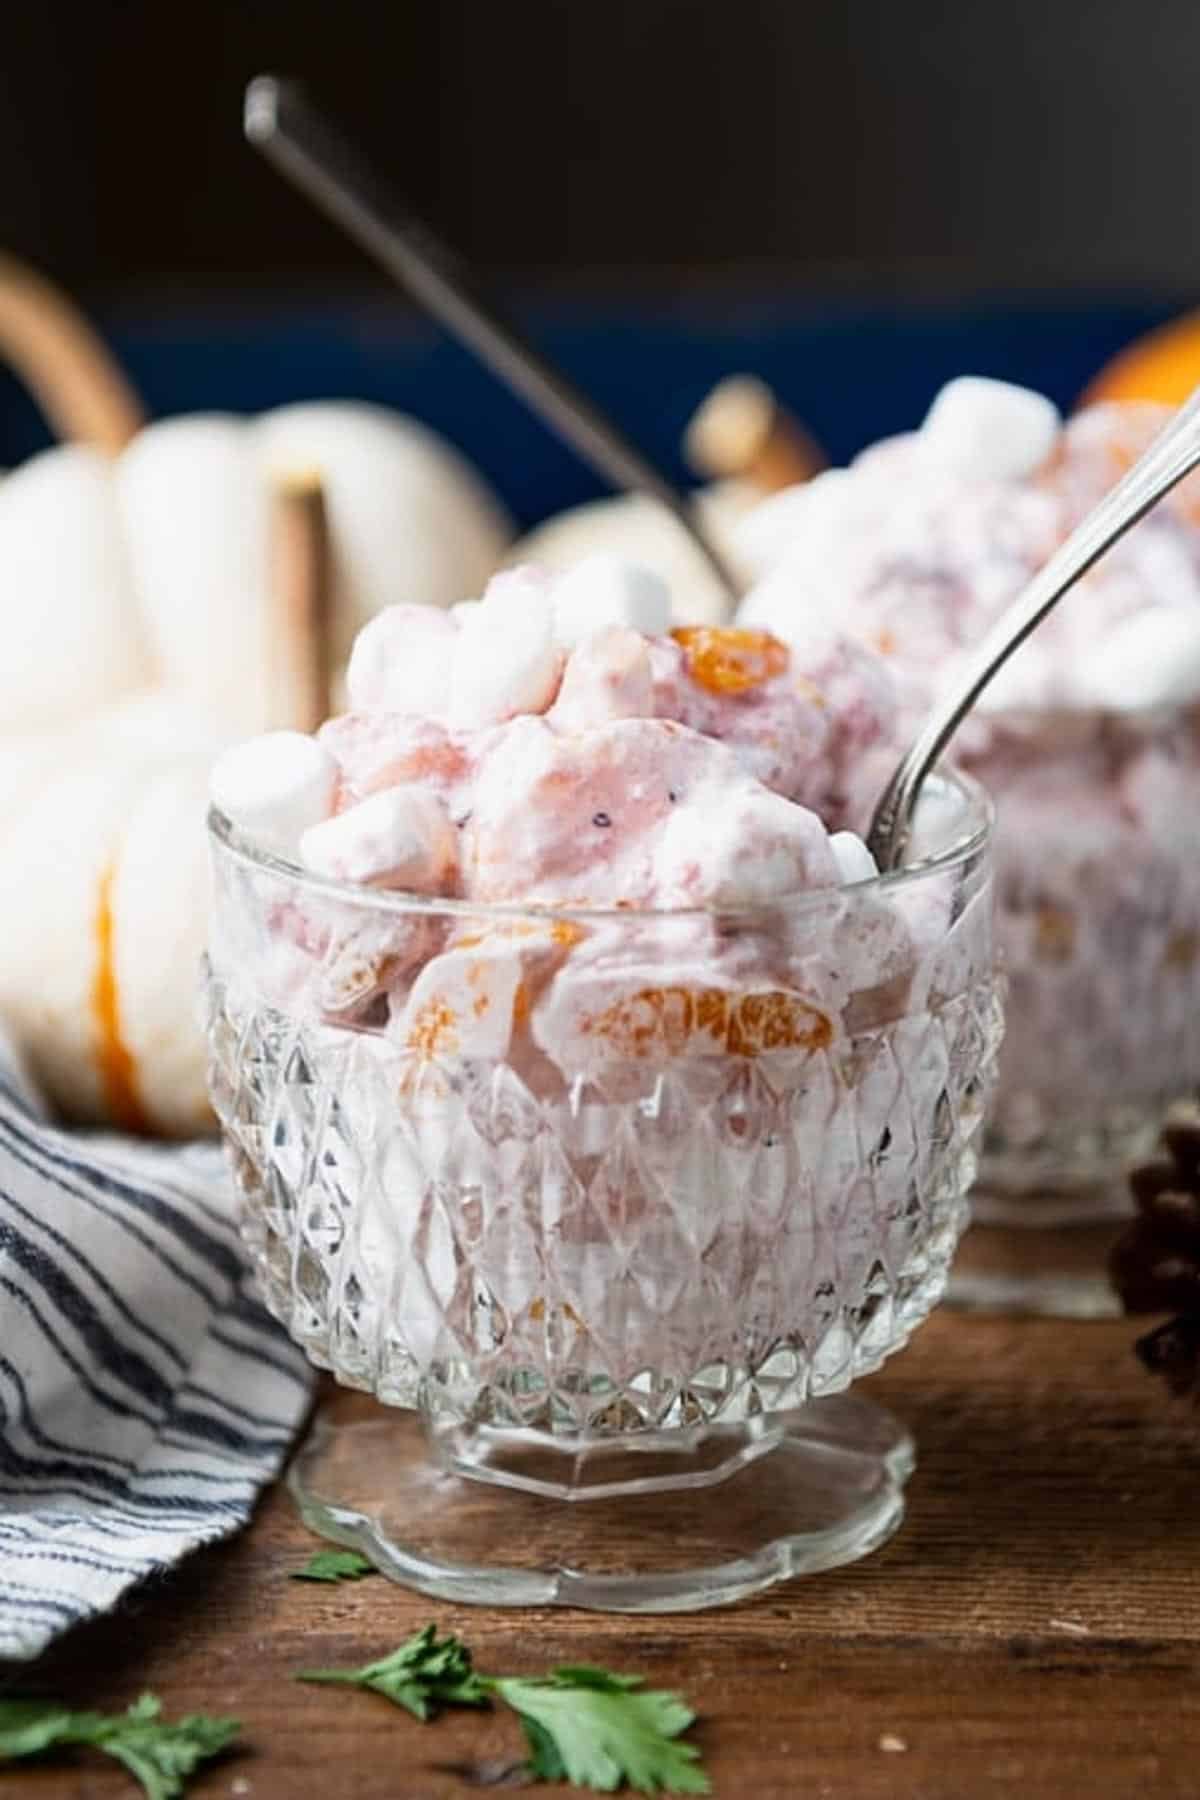 Spoons in two bowls of cranberry fluff salad.